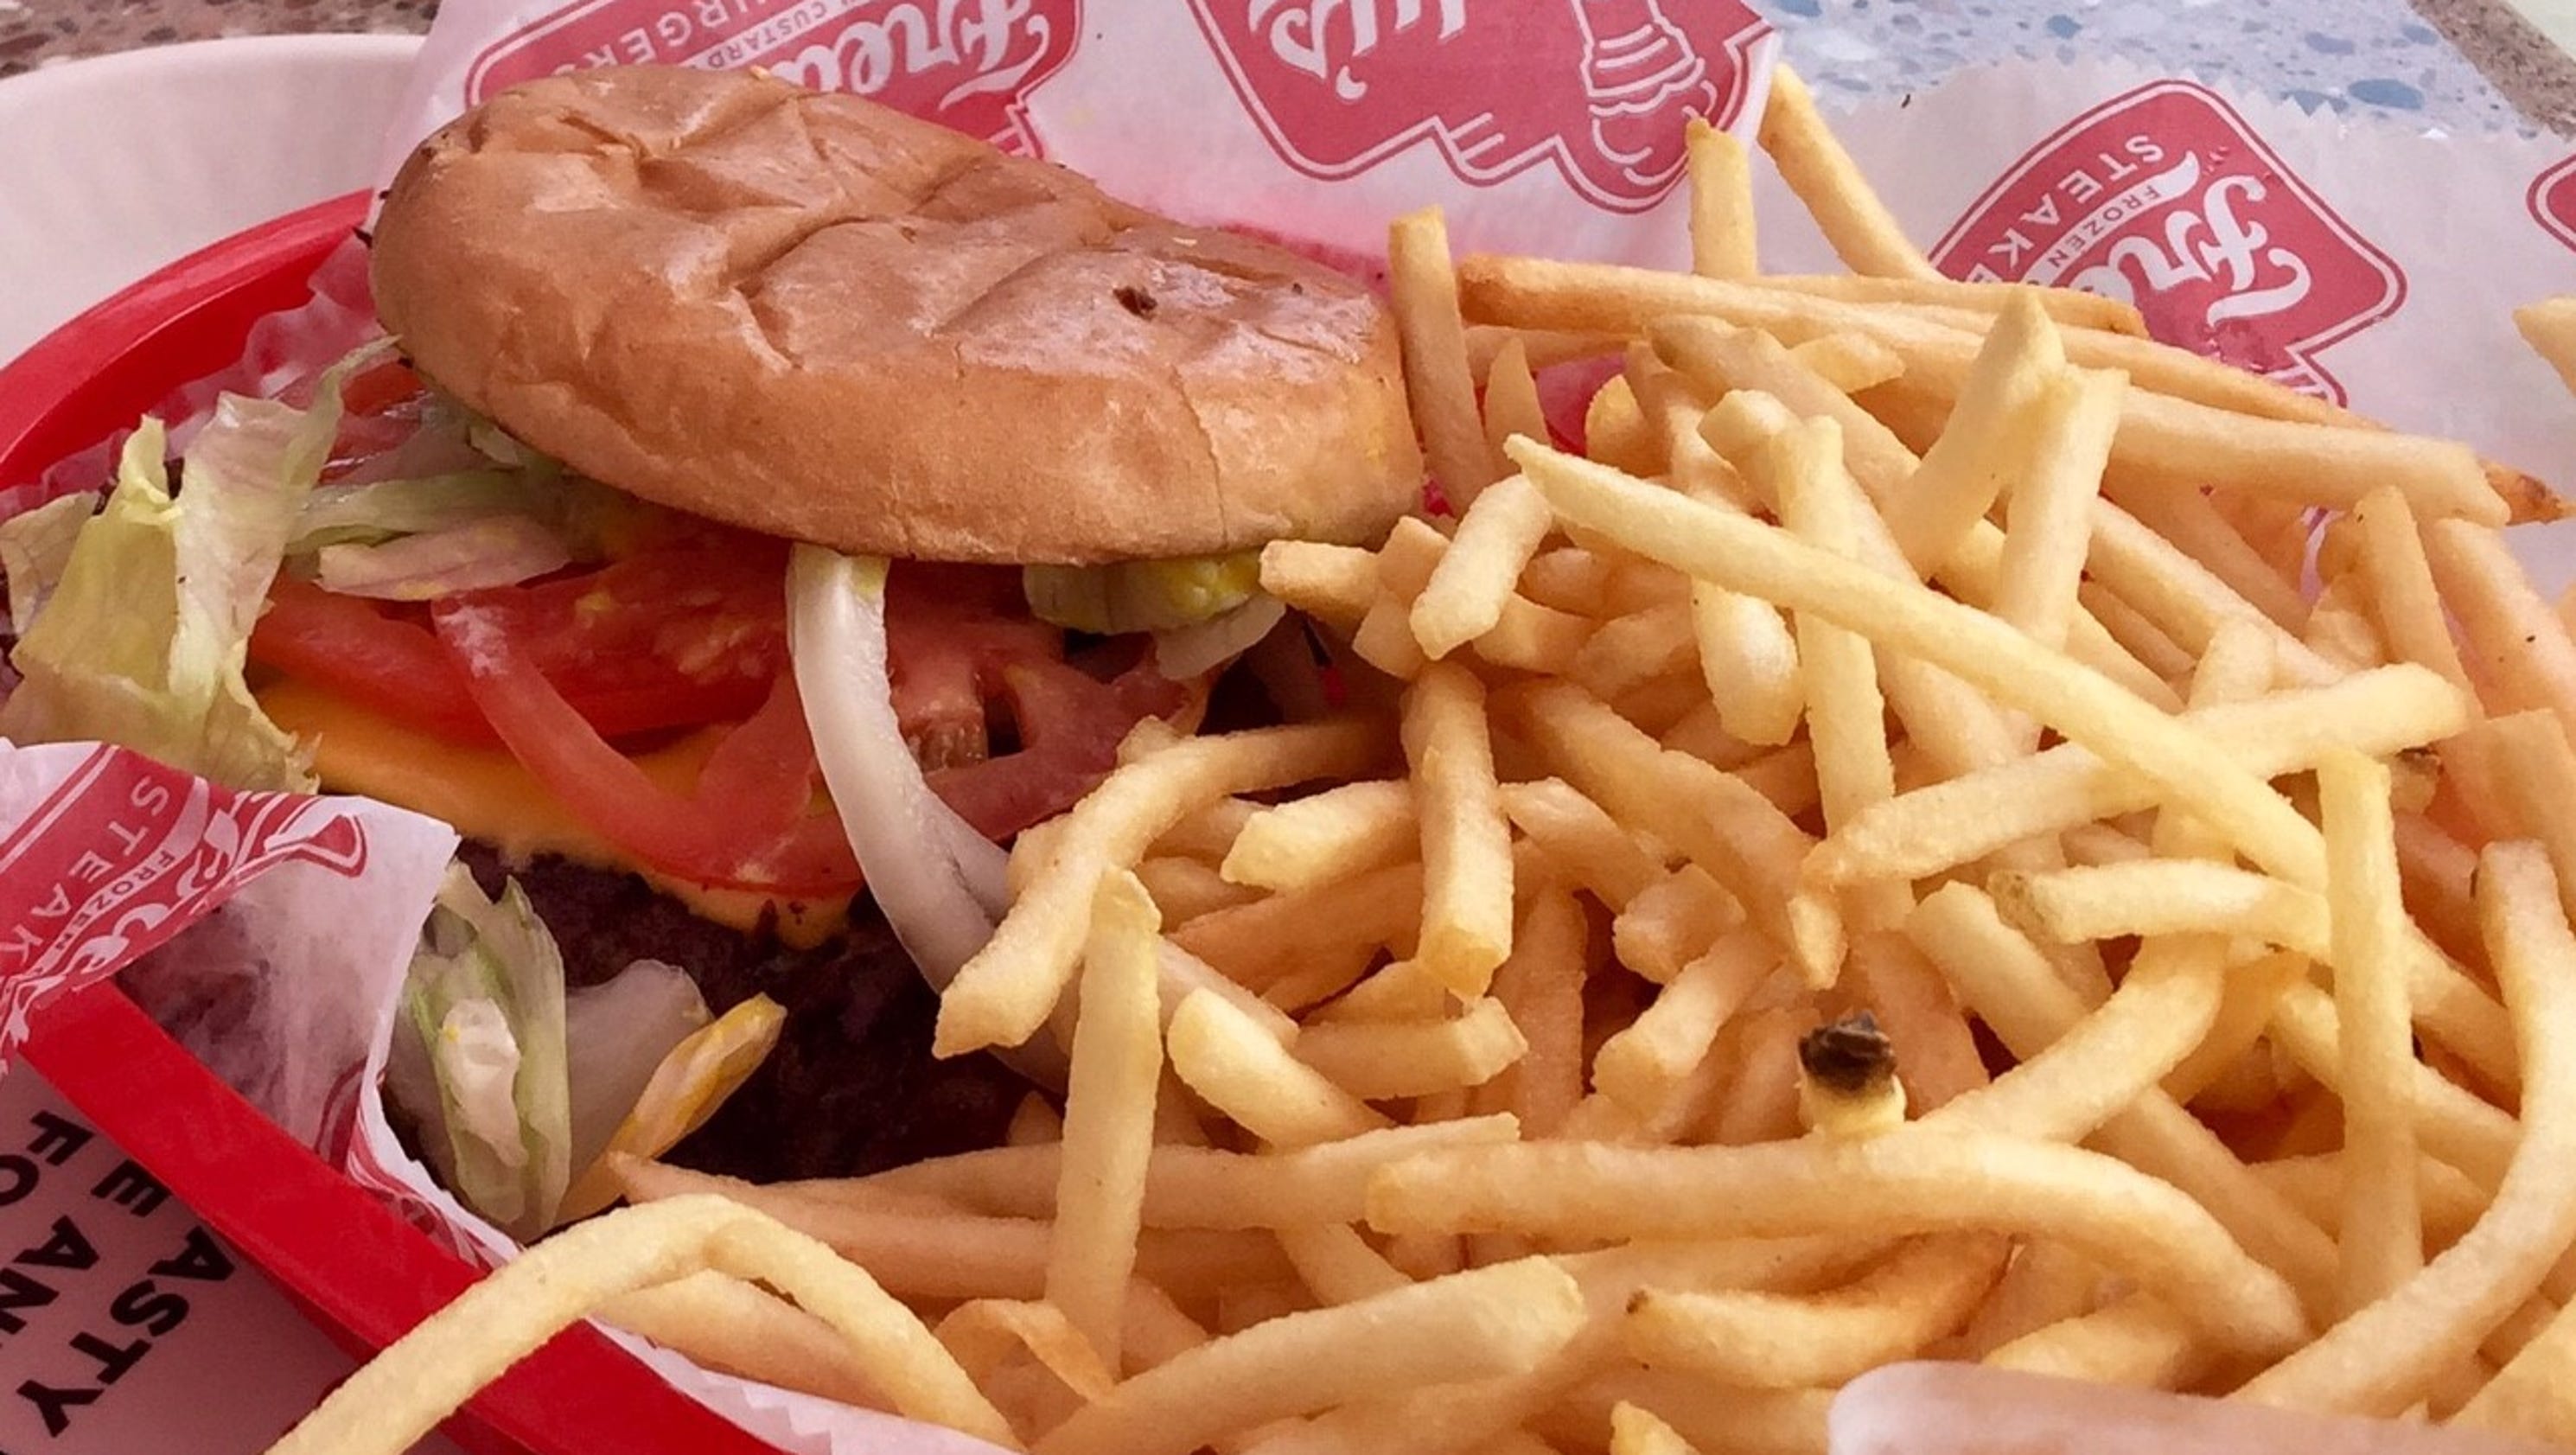 Freddy's brings its custard and steakburgers to Memphis